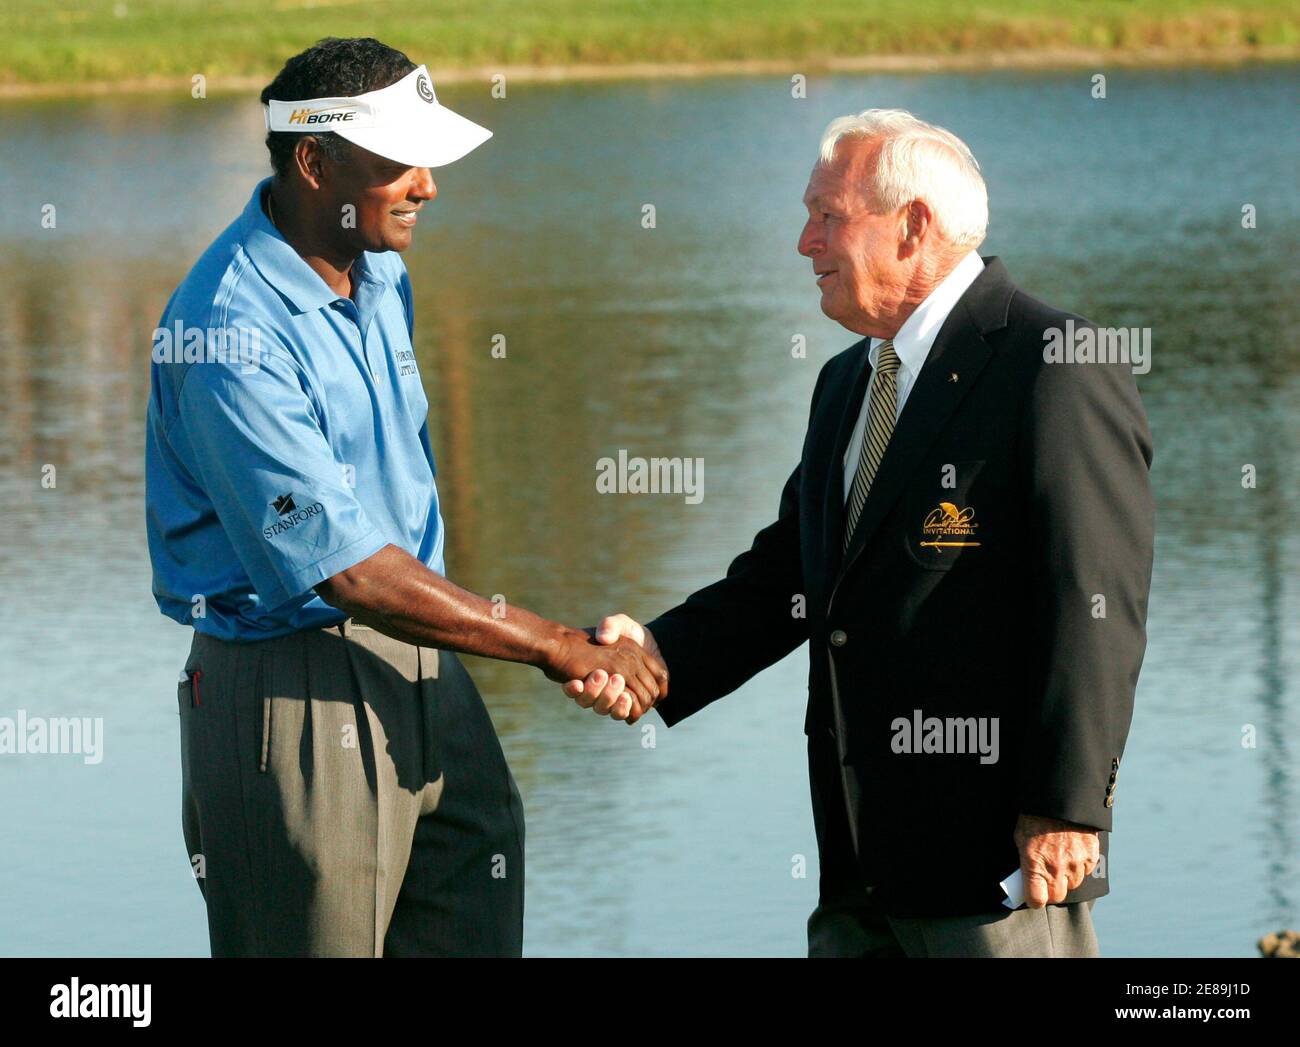 Vijay Singh (L) of Fiji shakes hands with host Arnold Palmer after winning the Arnold Palmer Invitational golf tournament at the Bay Hill Club in Orlando, Florida, March 18, 2007.  REUTERS/Rick Fowler (UNITED STATES) Stock Photo